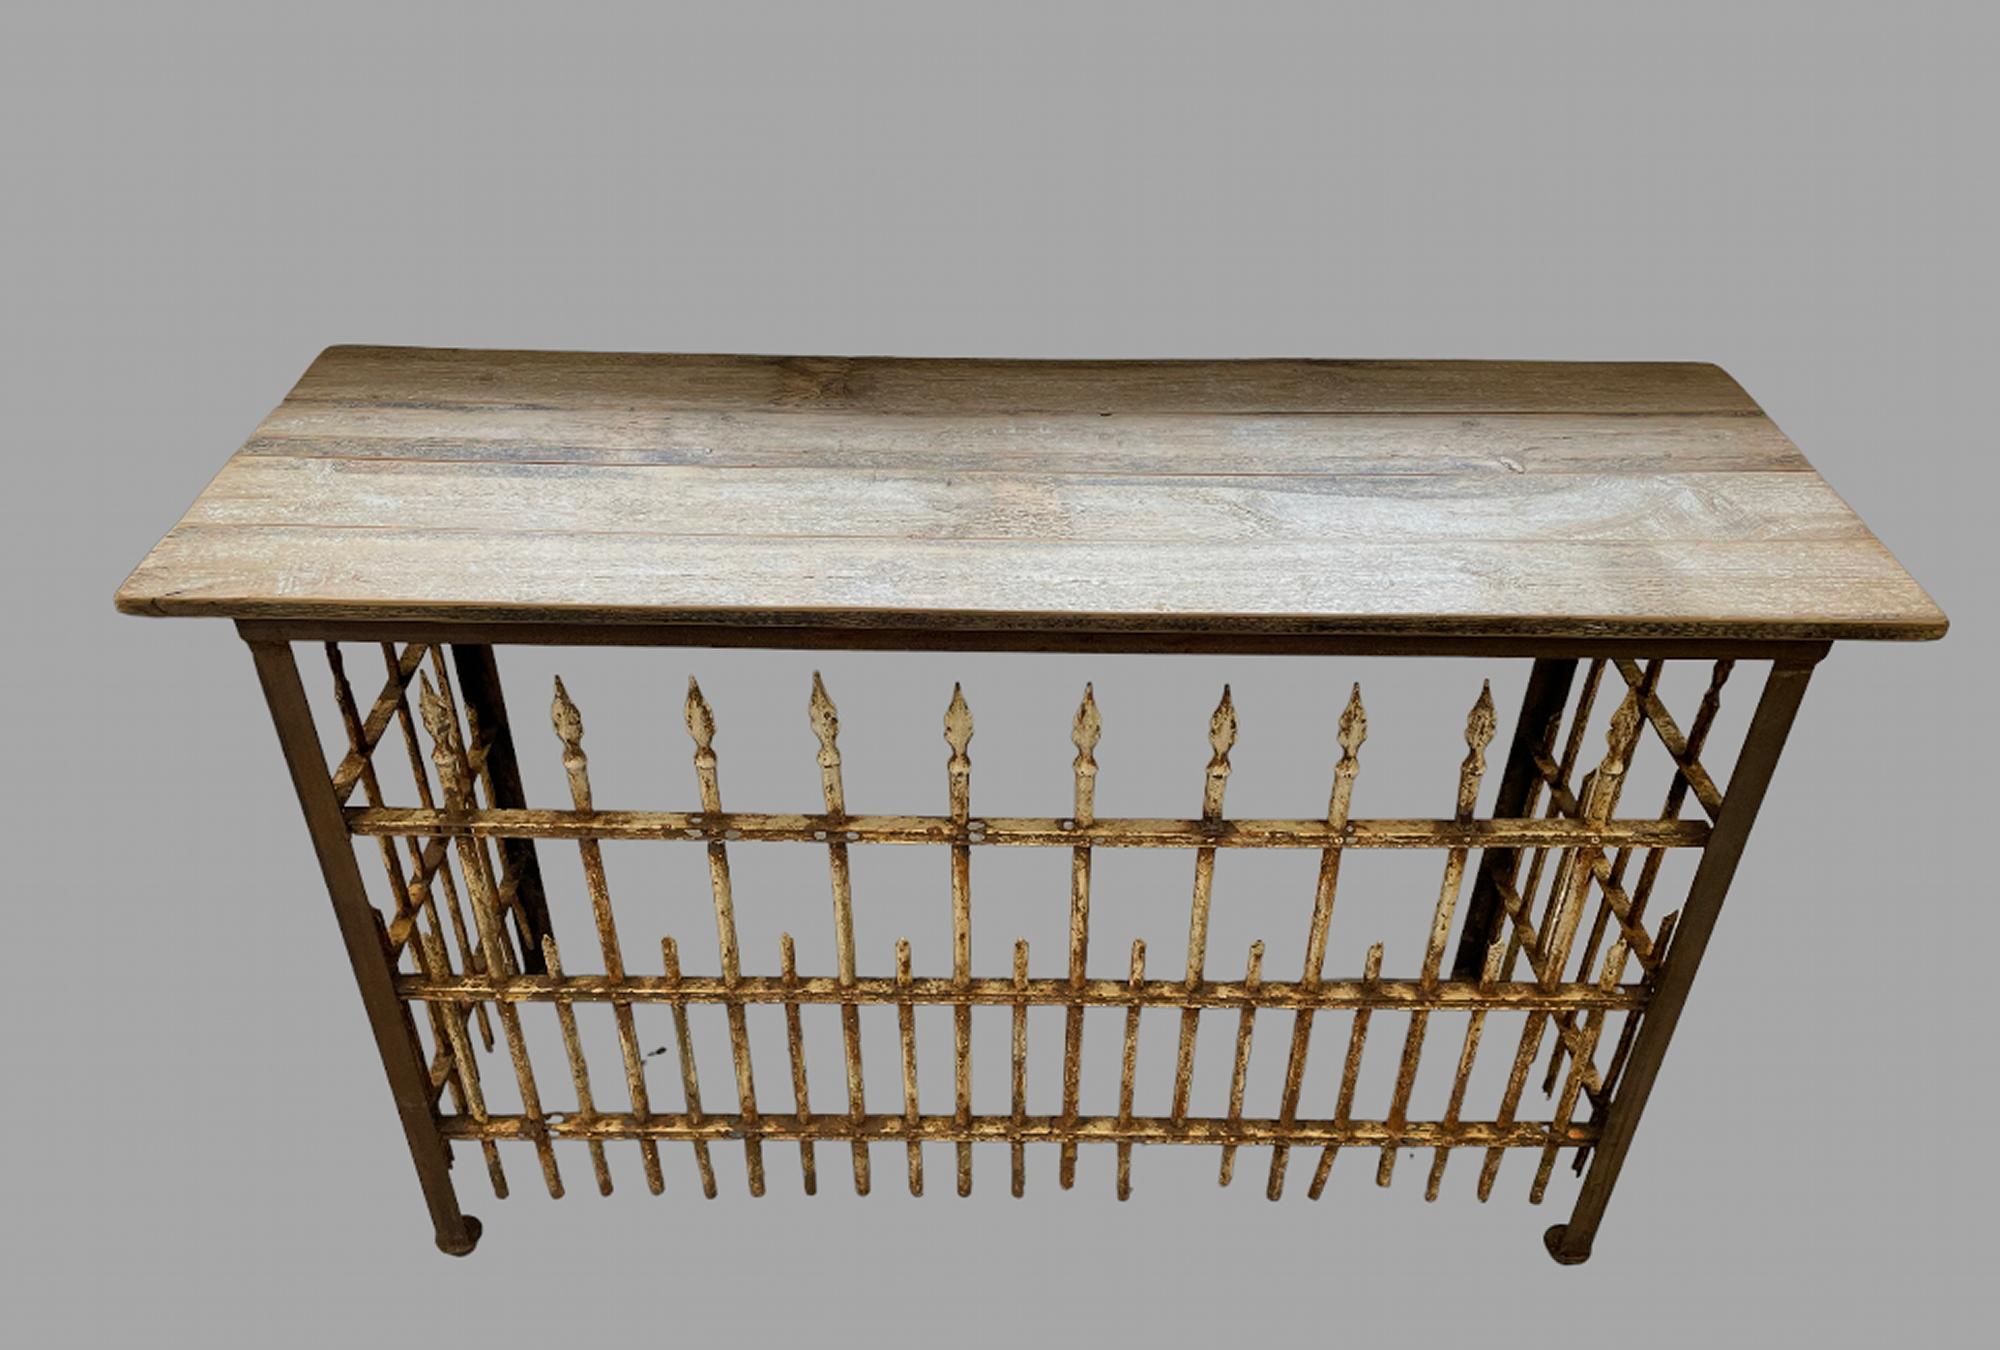 An interesting and unusual wrought iron railing console table. The Railings probably c1930's in distressed state with top of early 20thc wooden Planks. Should a prospect purchaser wish the distressed railings painted black/white this can done.